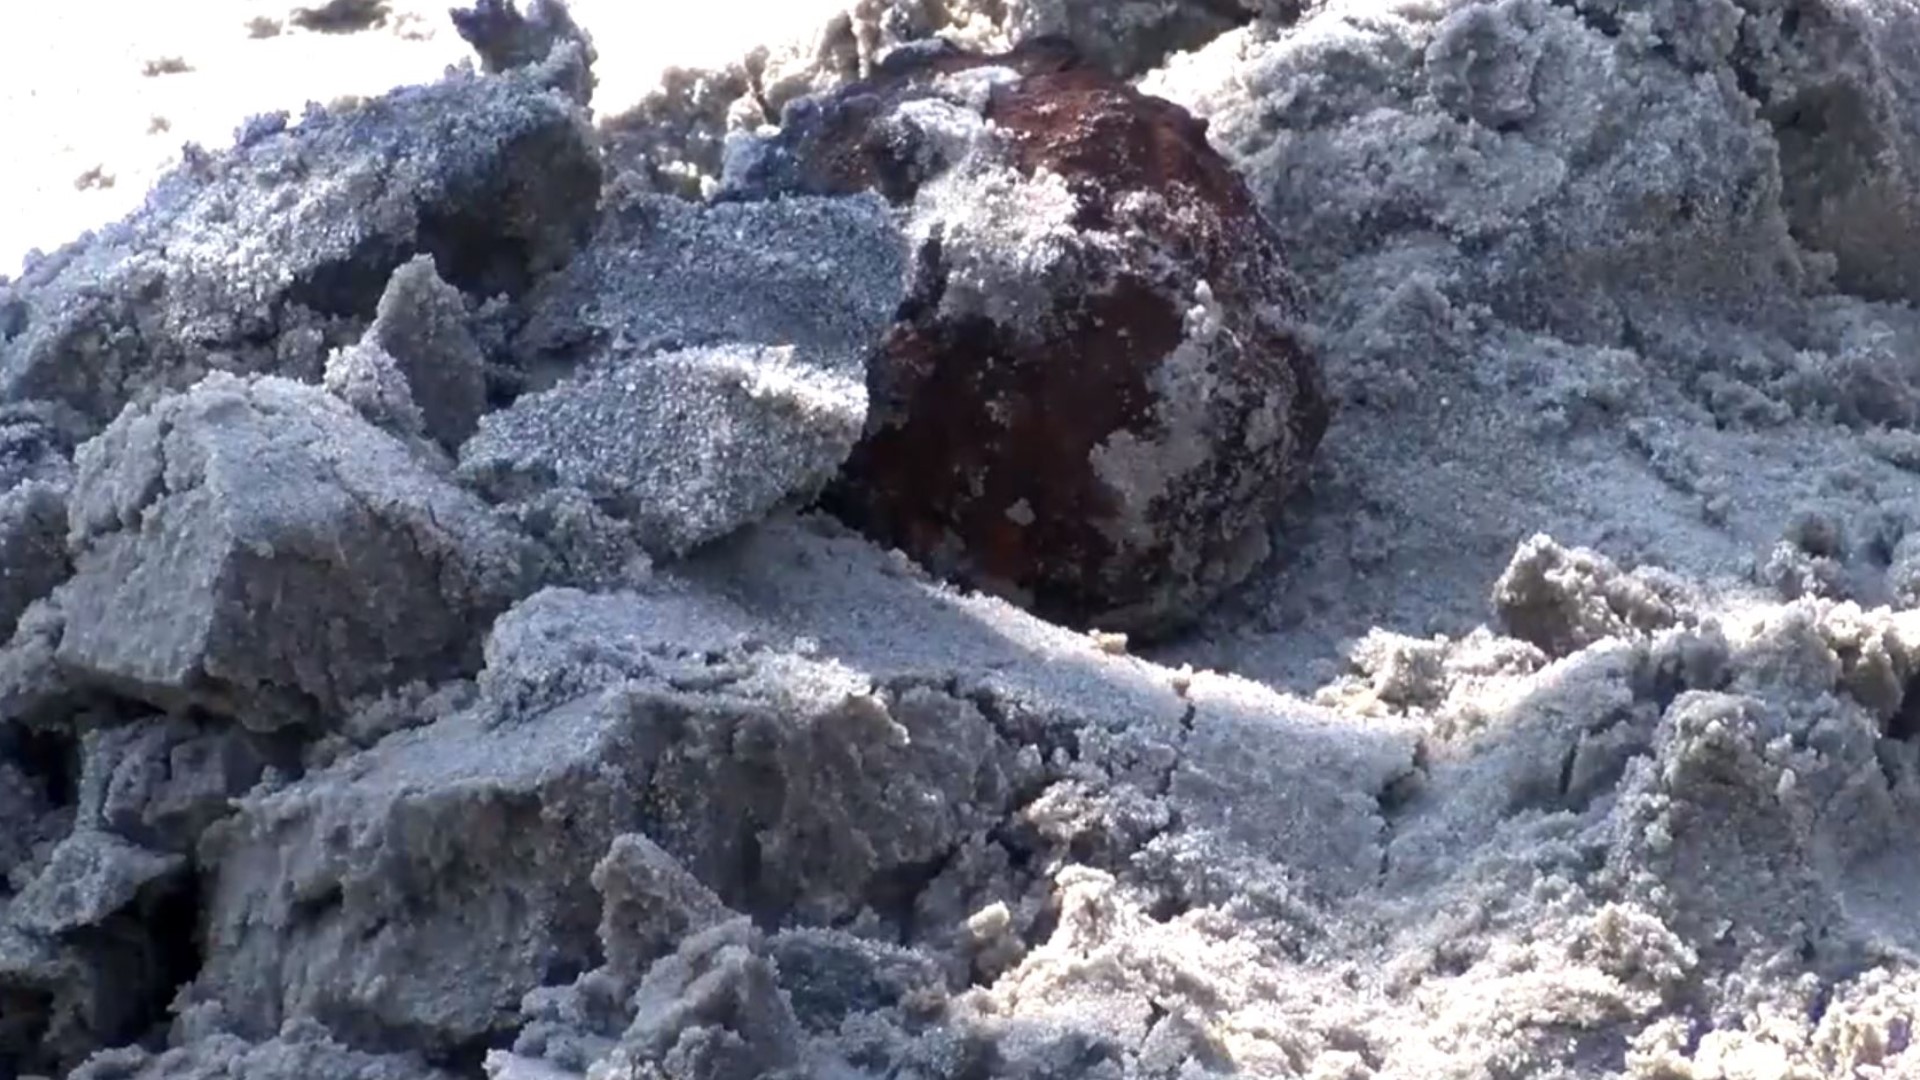 Beachgoers found two Civil-War-era cannonballs on the edge of Folly Beach, uncovered by Hurricane Dorian and laying in the sand. This isn’t the first time Civil War cannonballs have been found on Folly Beach. Sixteen civil war cannonballs were found in the same location, after Hurricane Matthew in 2016.